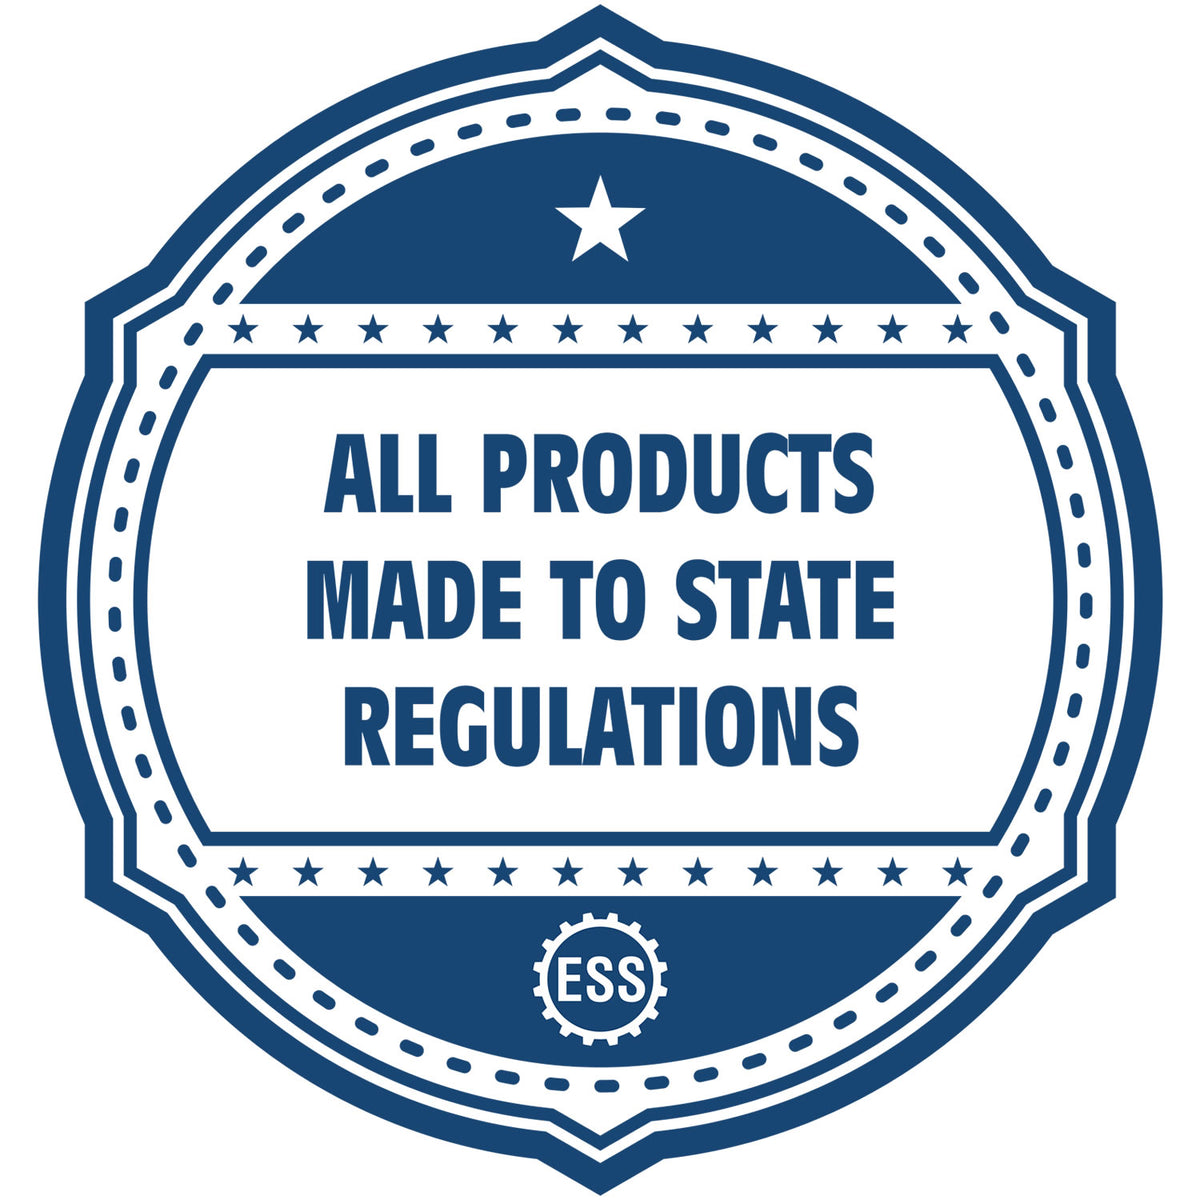 An icon or badge element for the State of Louisiana Architectural Seal Embosser showing that this product is made in compliance with state regulations.